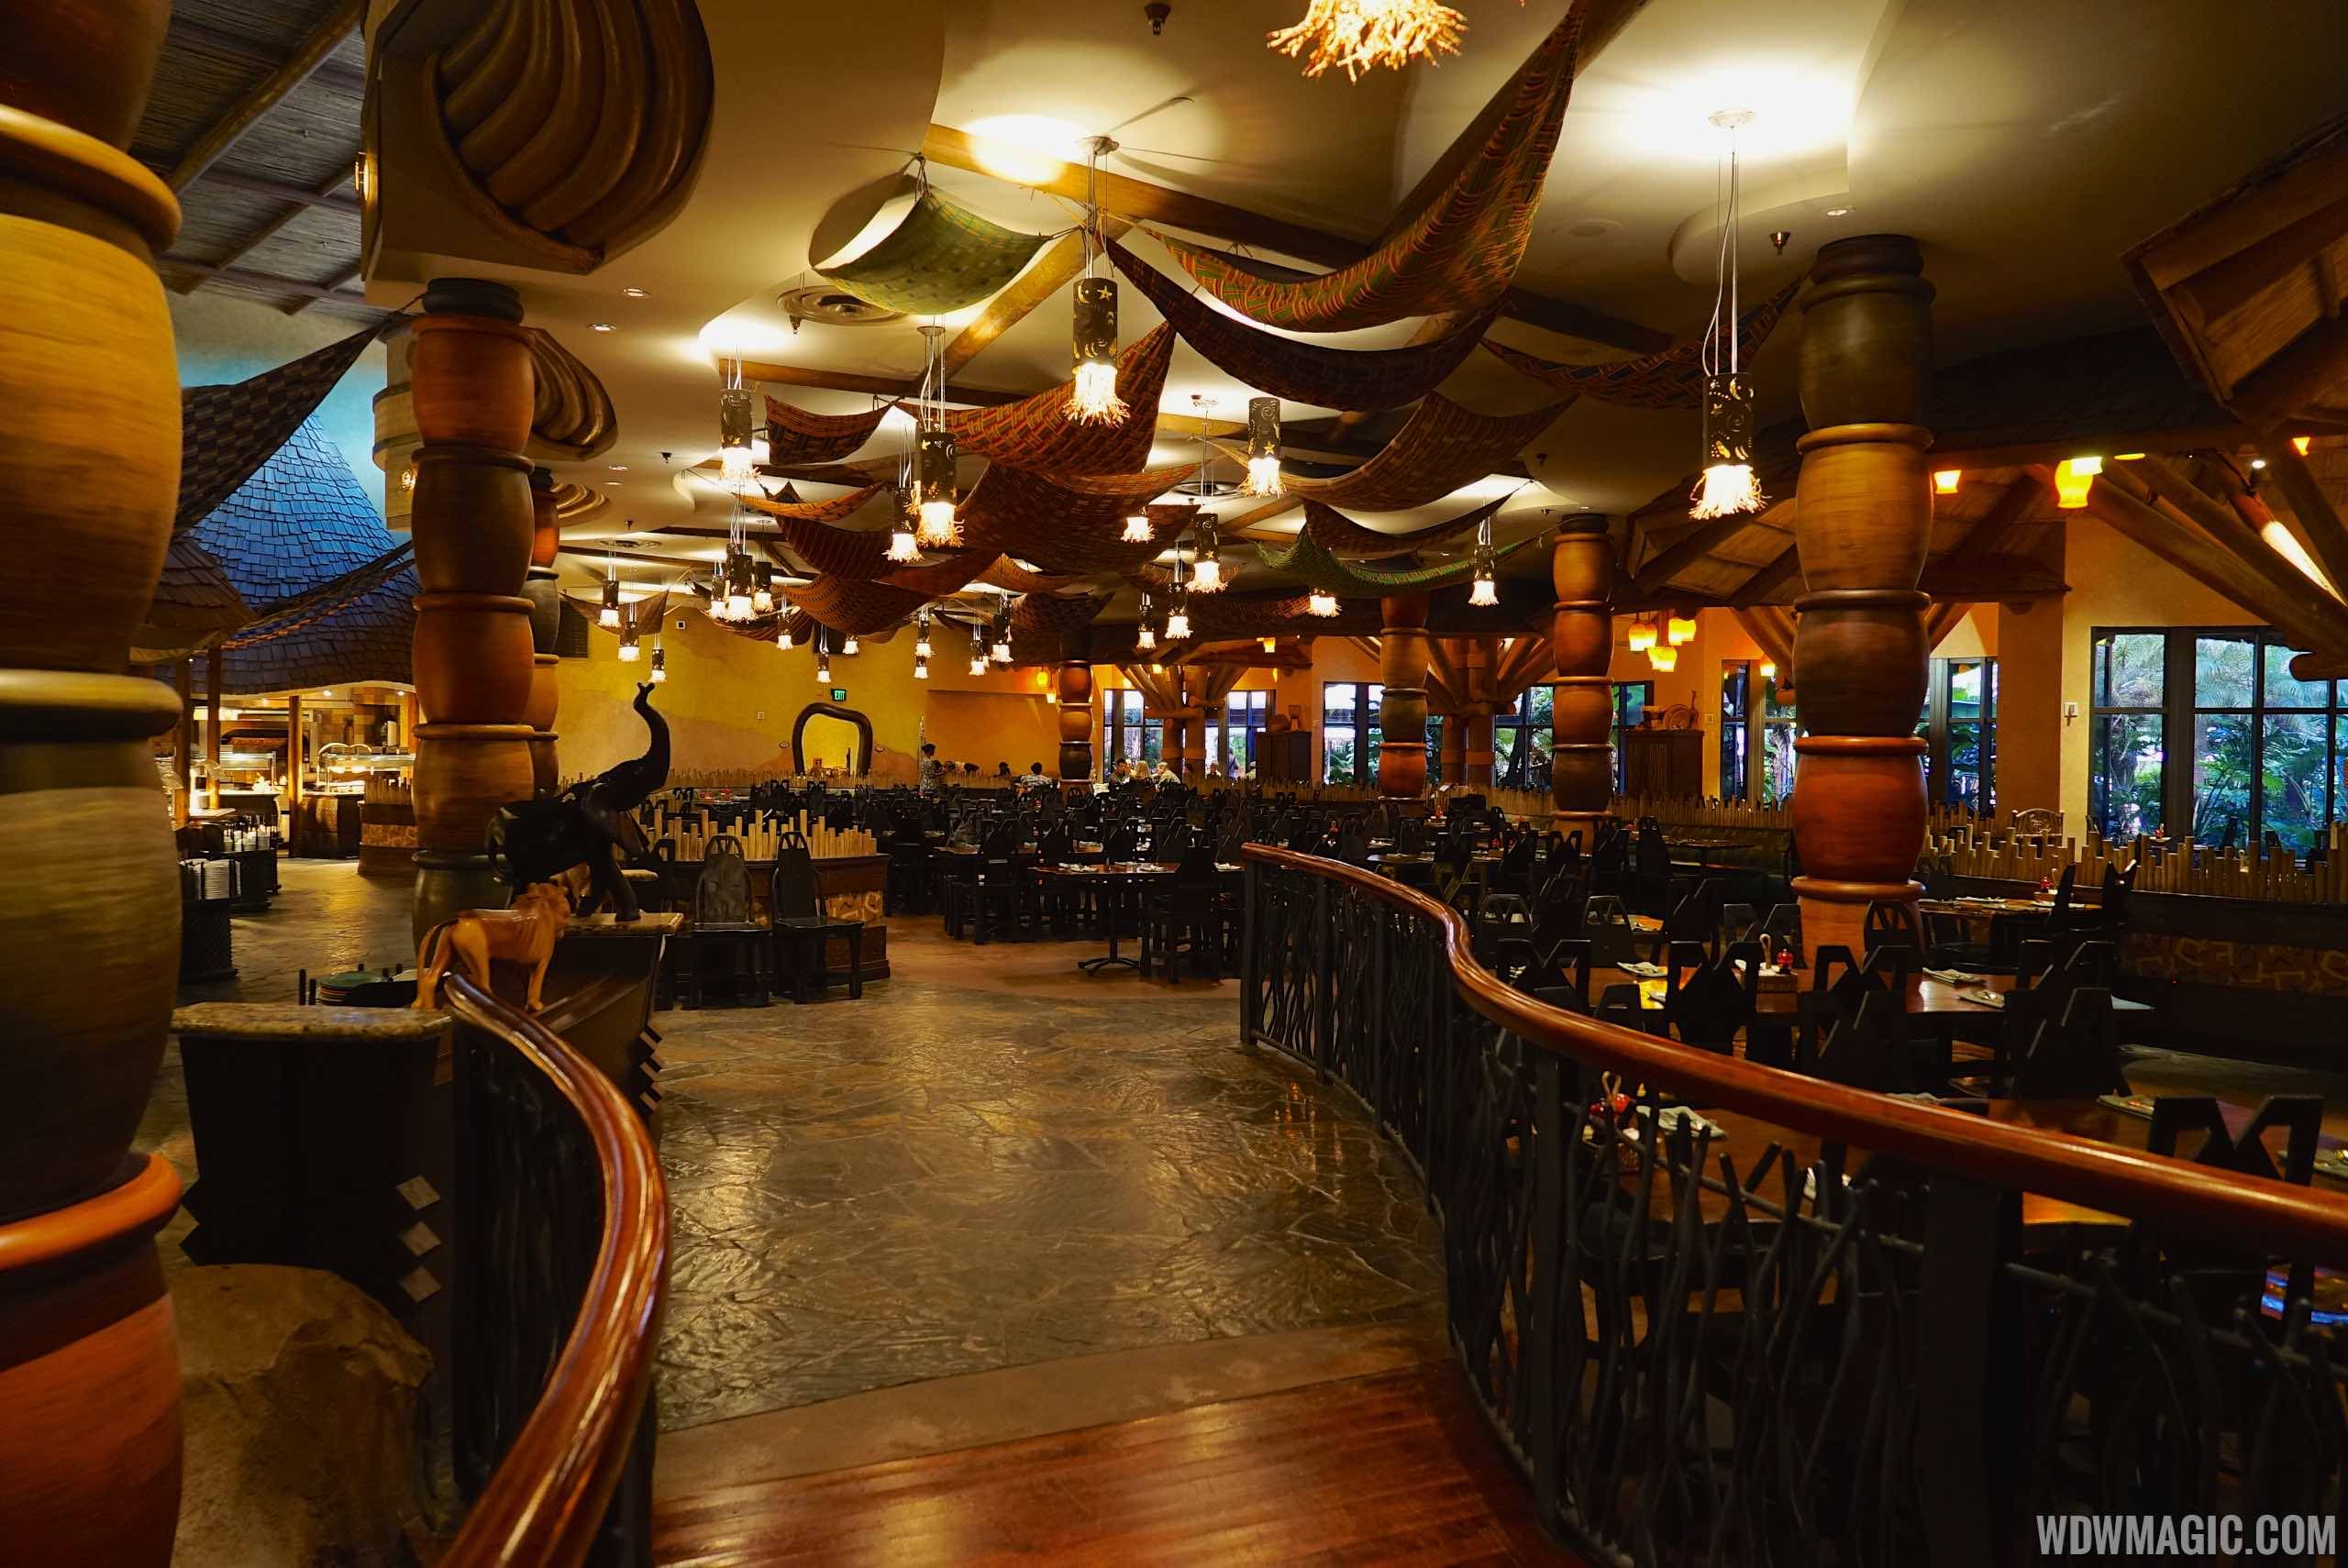 New breakfast and dinner menus released for Boma at Disney's Animal Kingdom Lodge